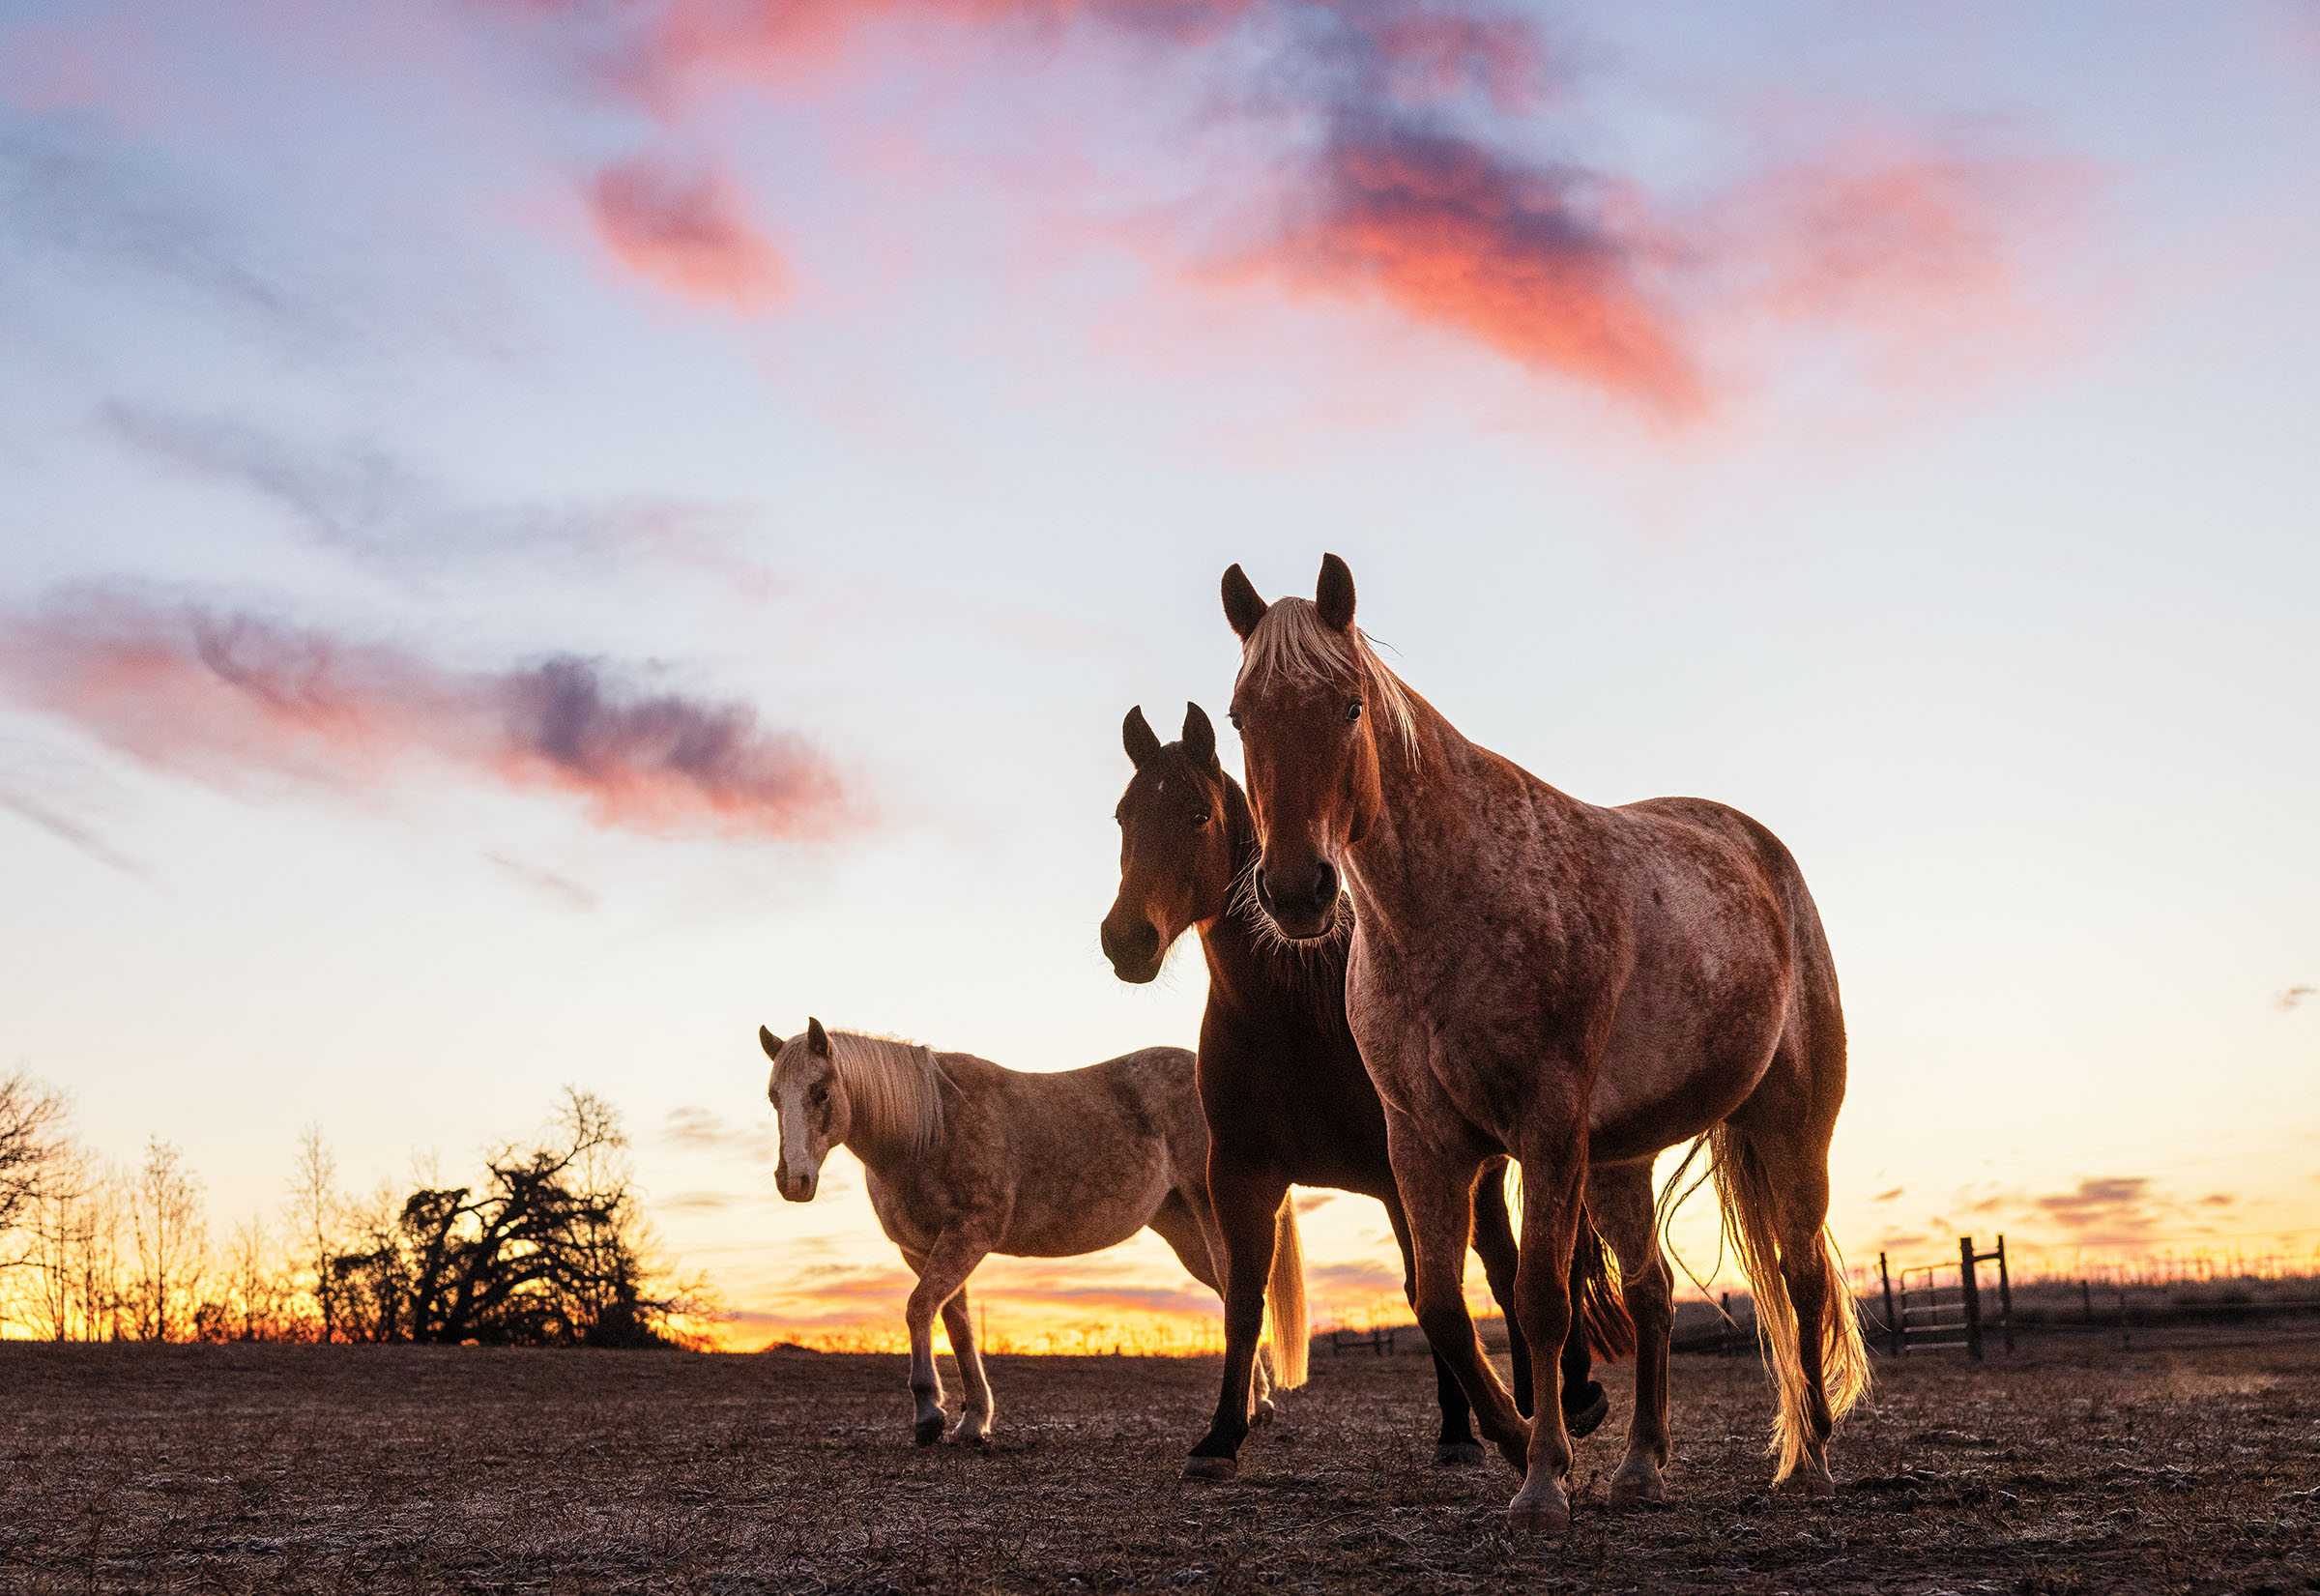 Three horses stand in a natural setting with pink clouds overhead